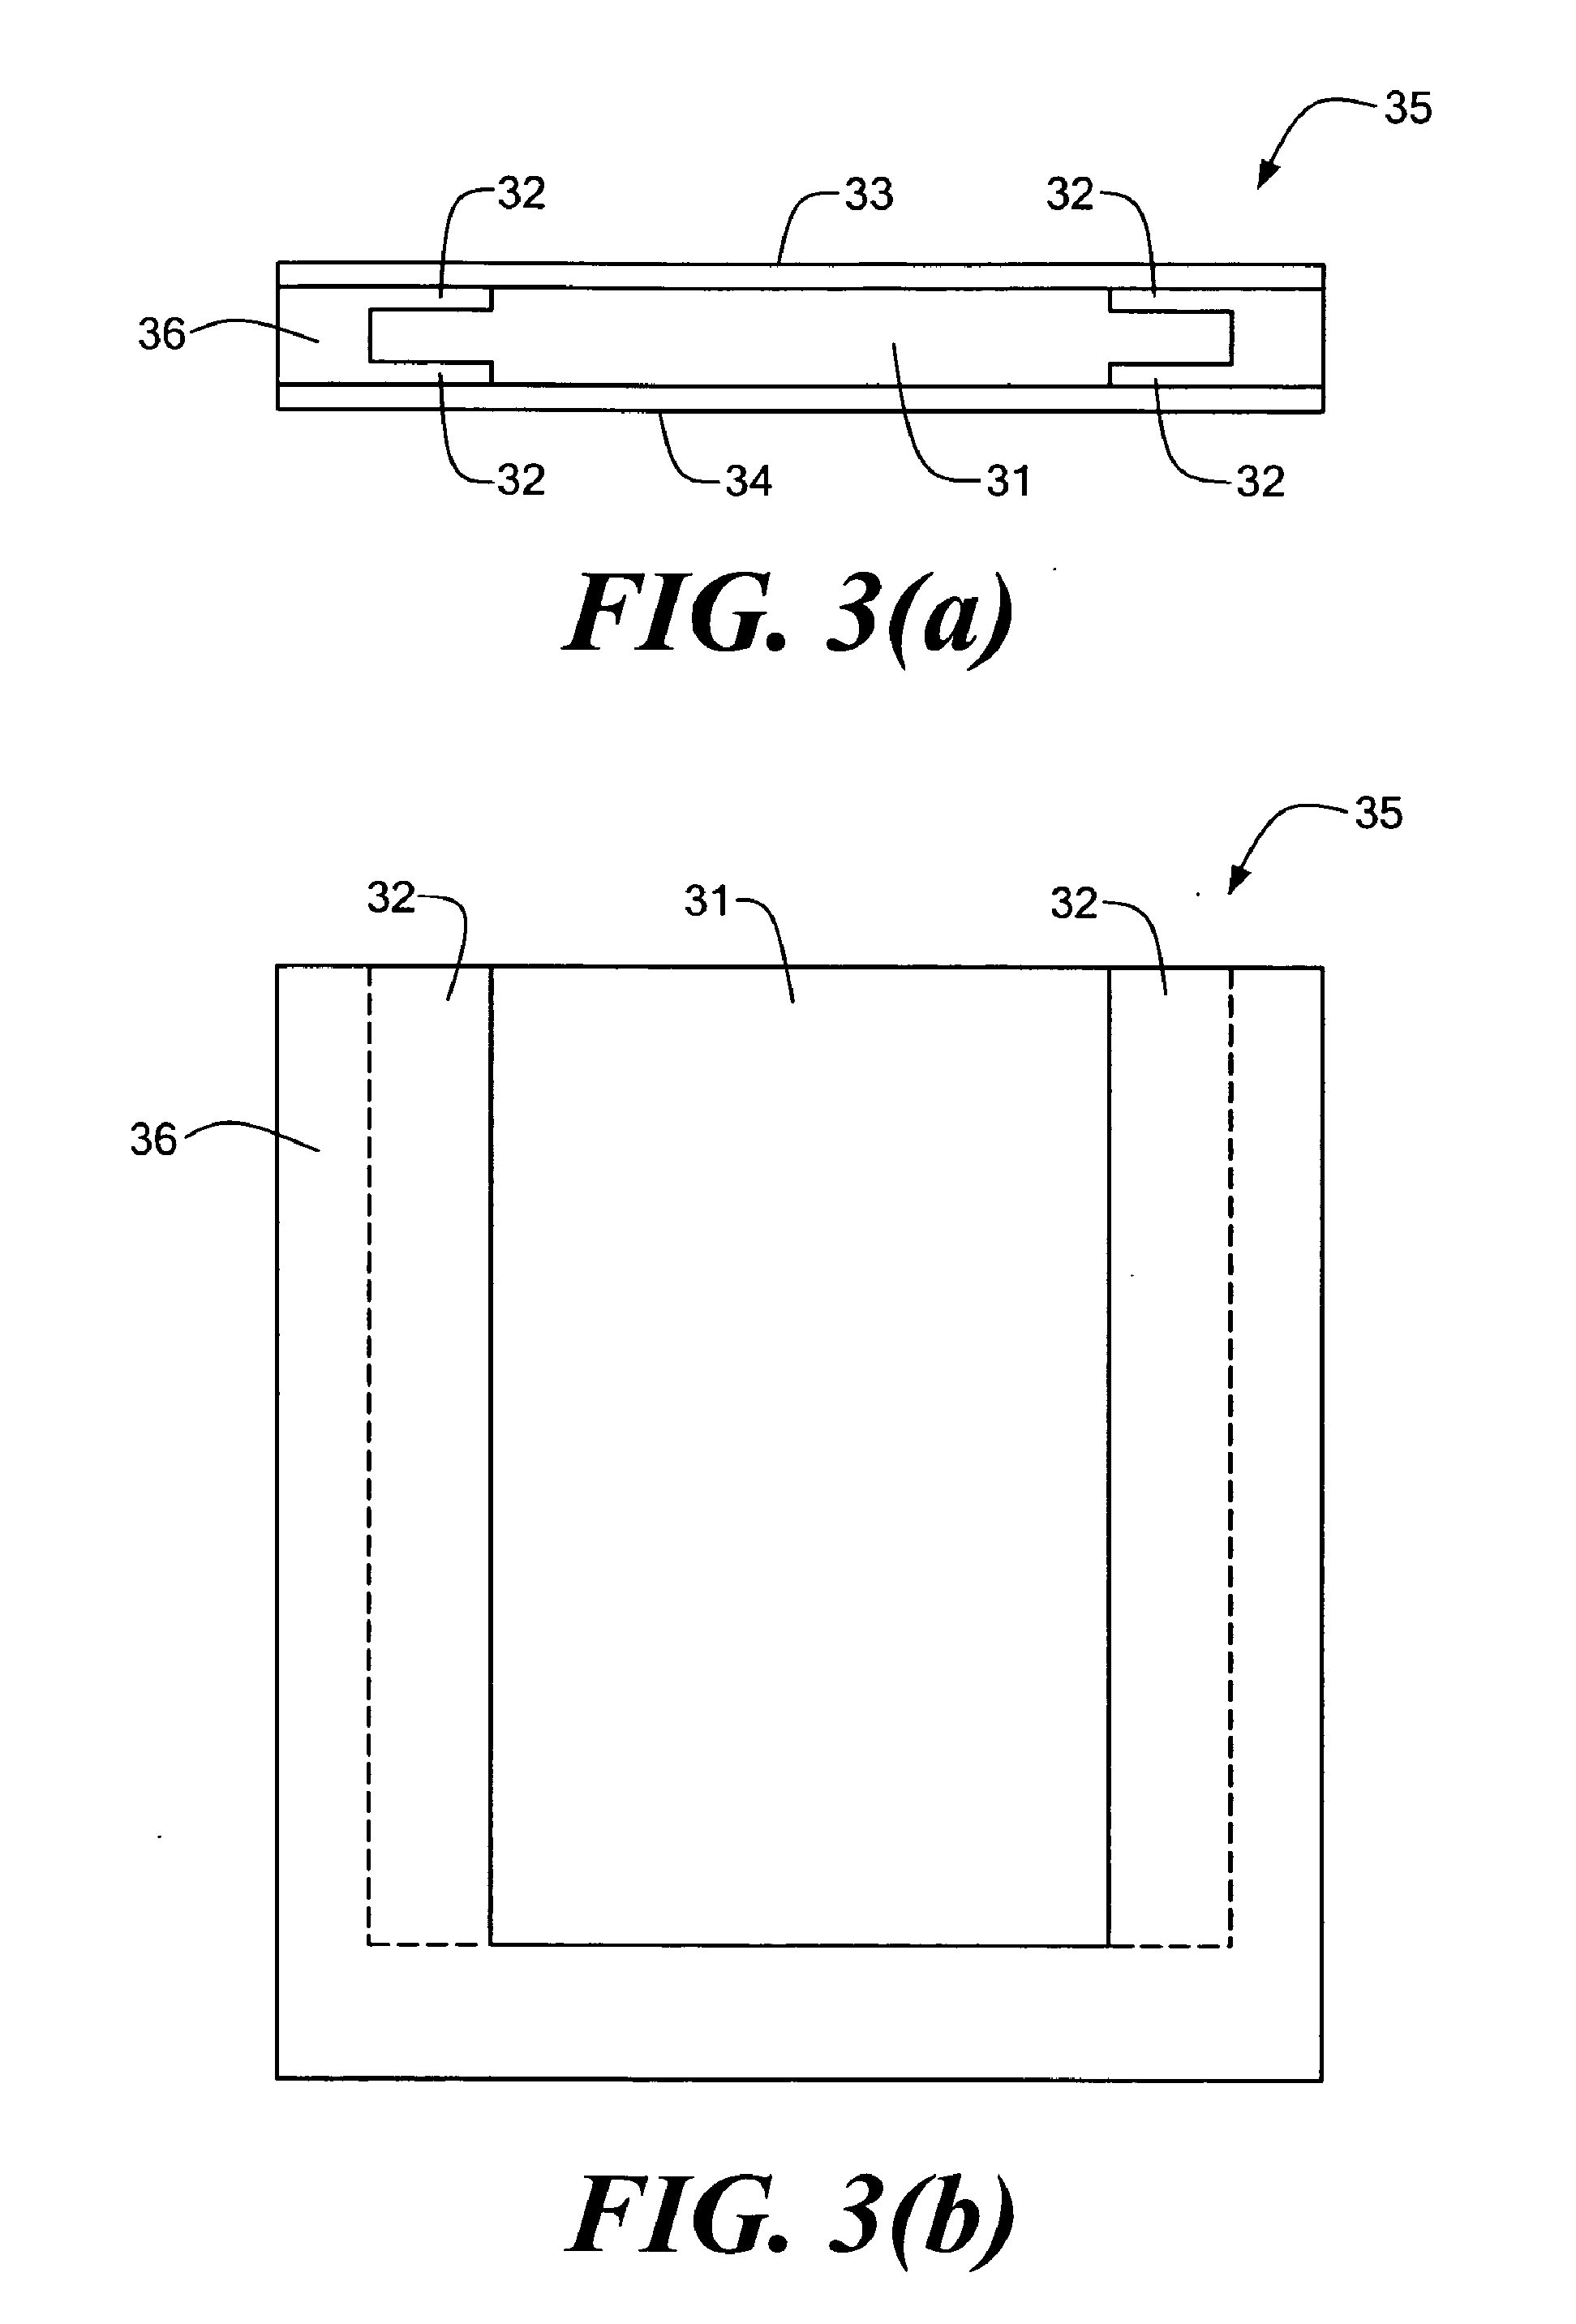 Assay imaging apparatus and methods